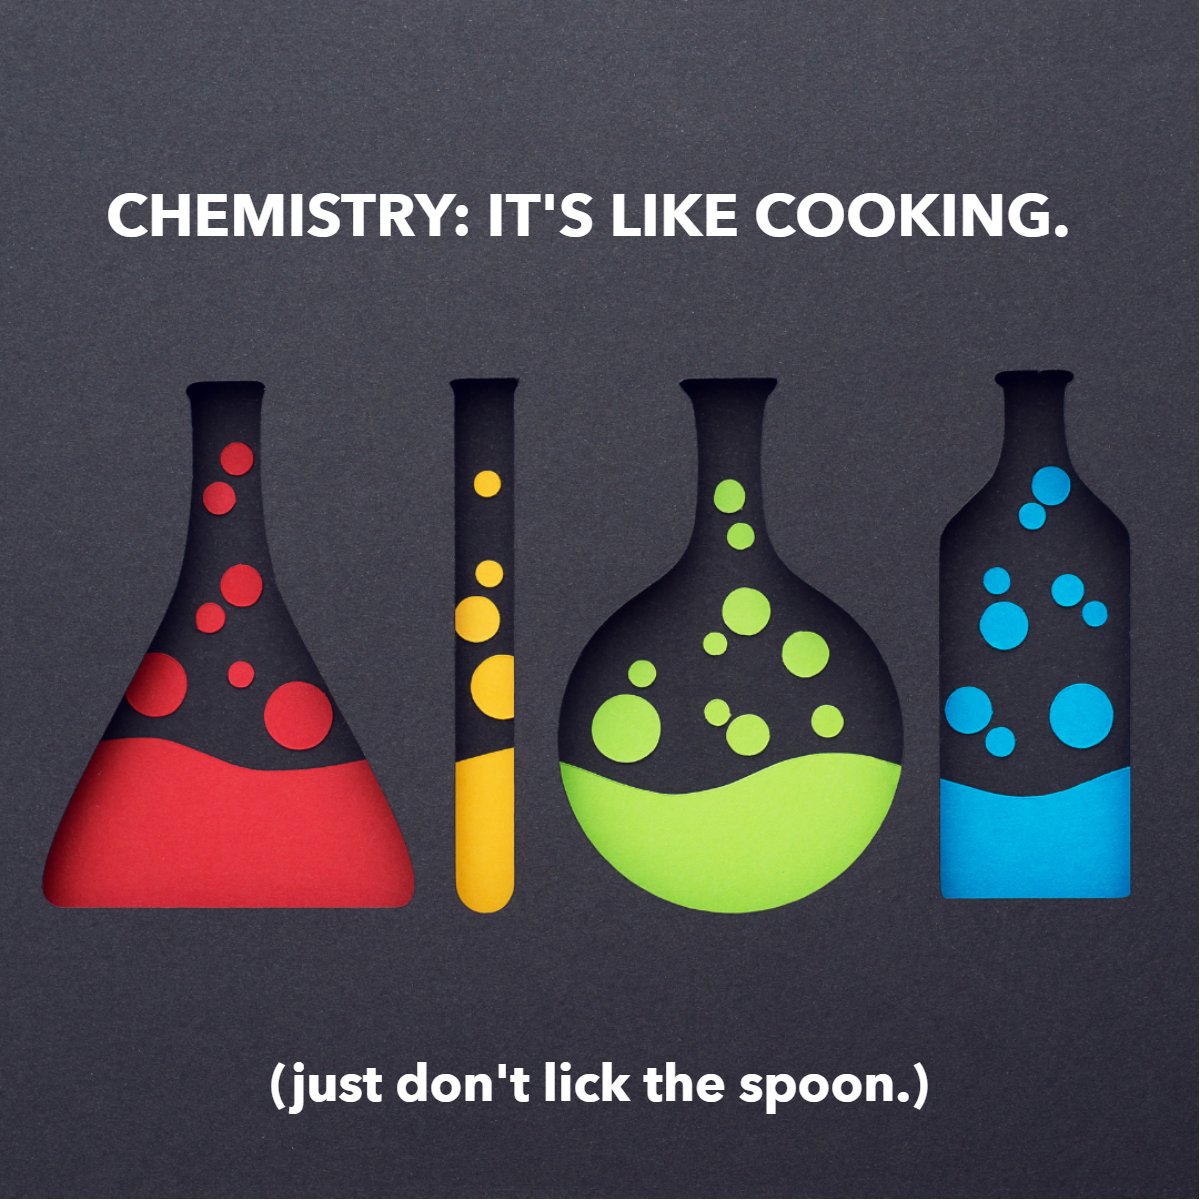 Cooking itself is really just chemistry... 🔬🧪

#cooking   #chemistrymemes   #chemistryjokes   #chemistry   #cookingtime   #chemistryiscooking